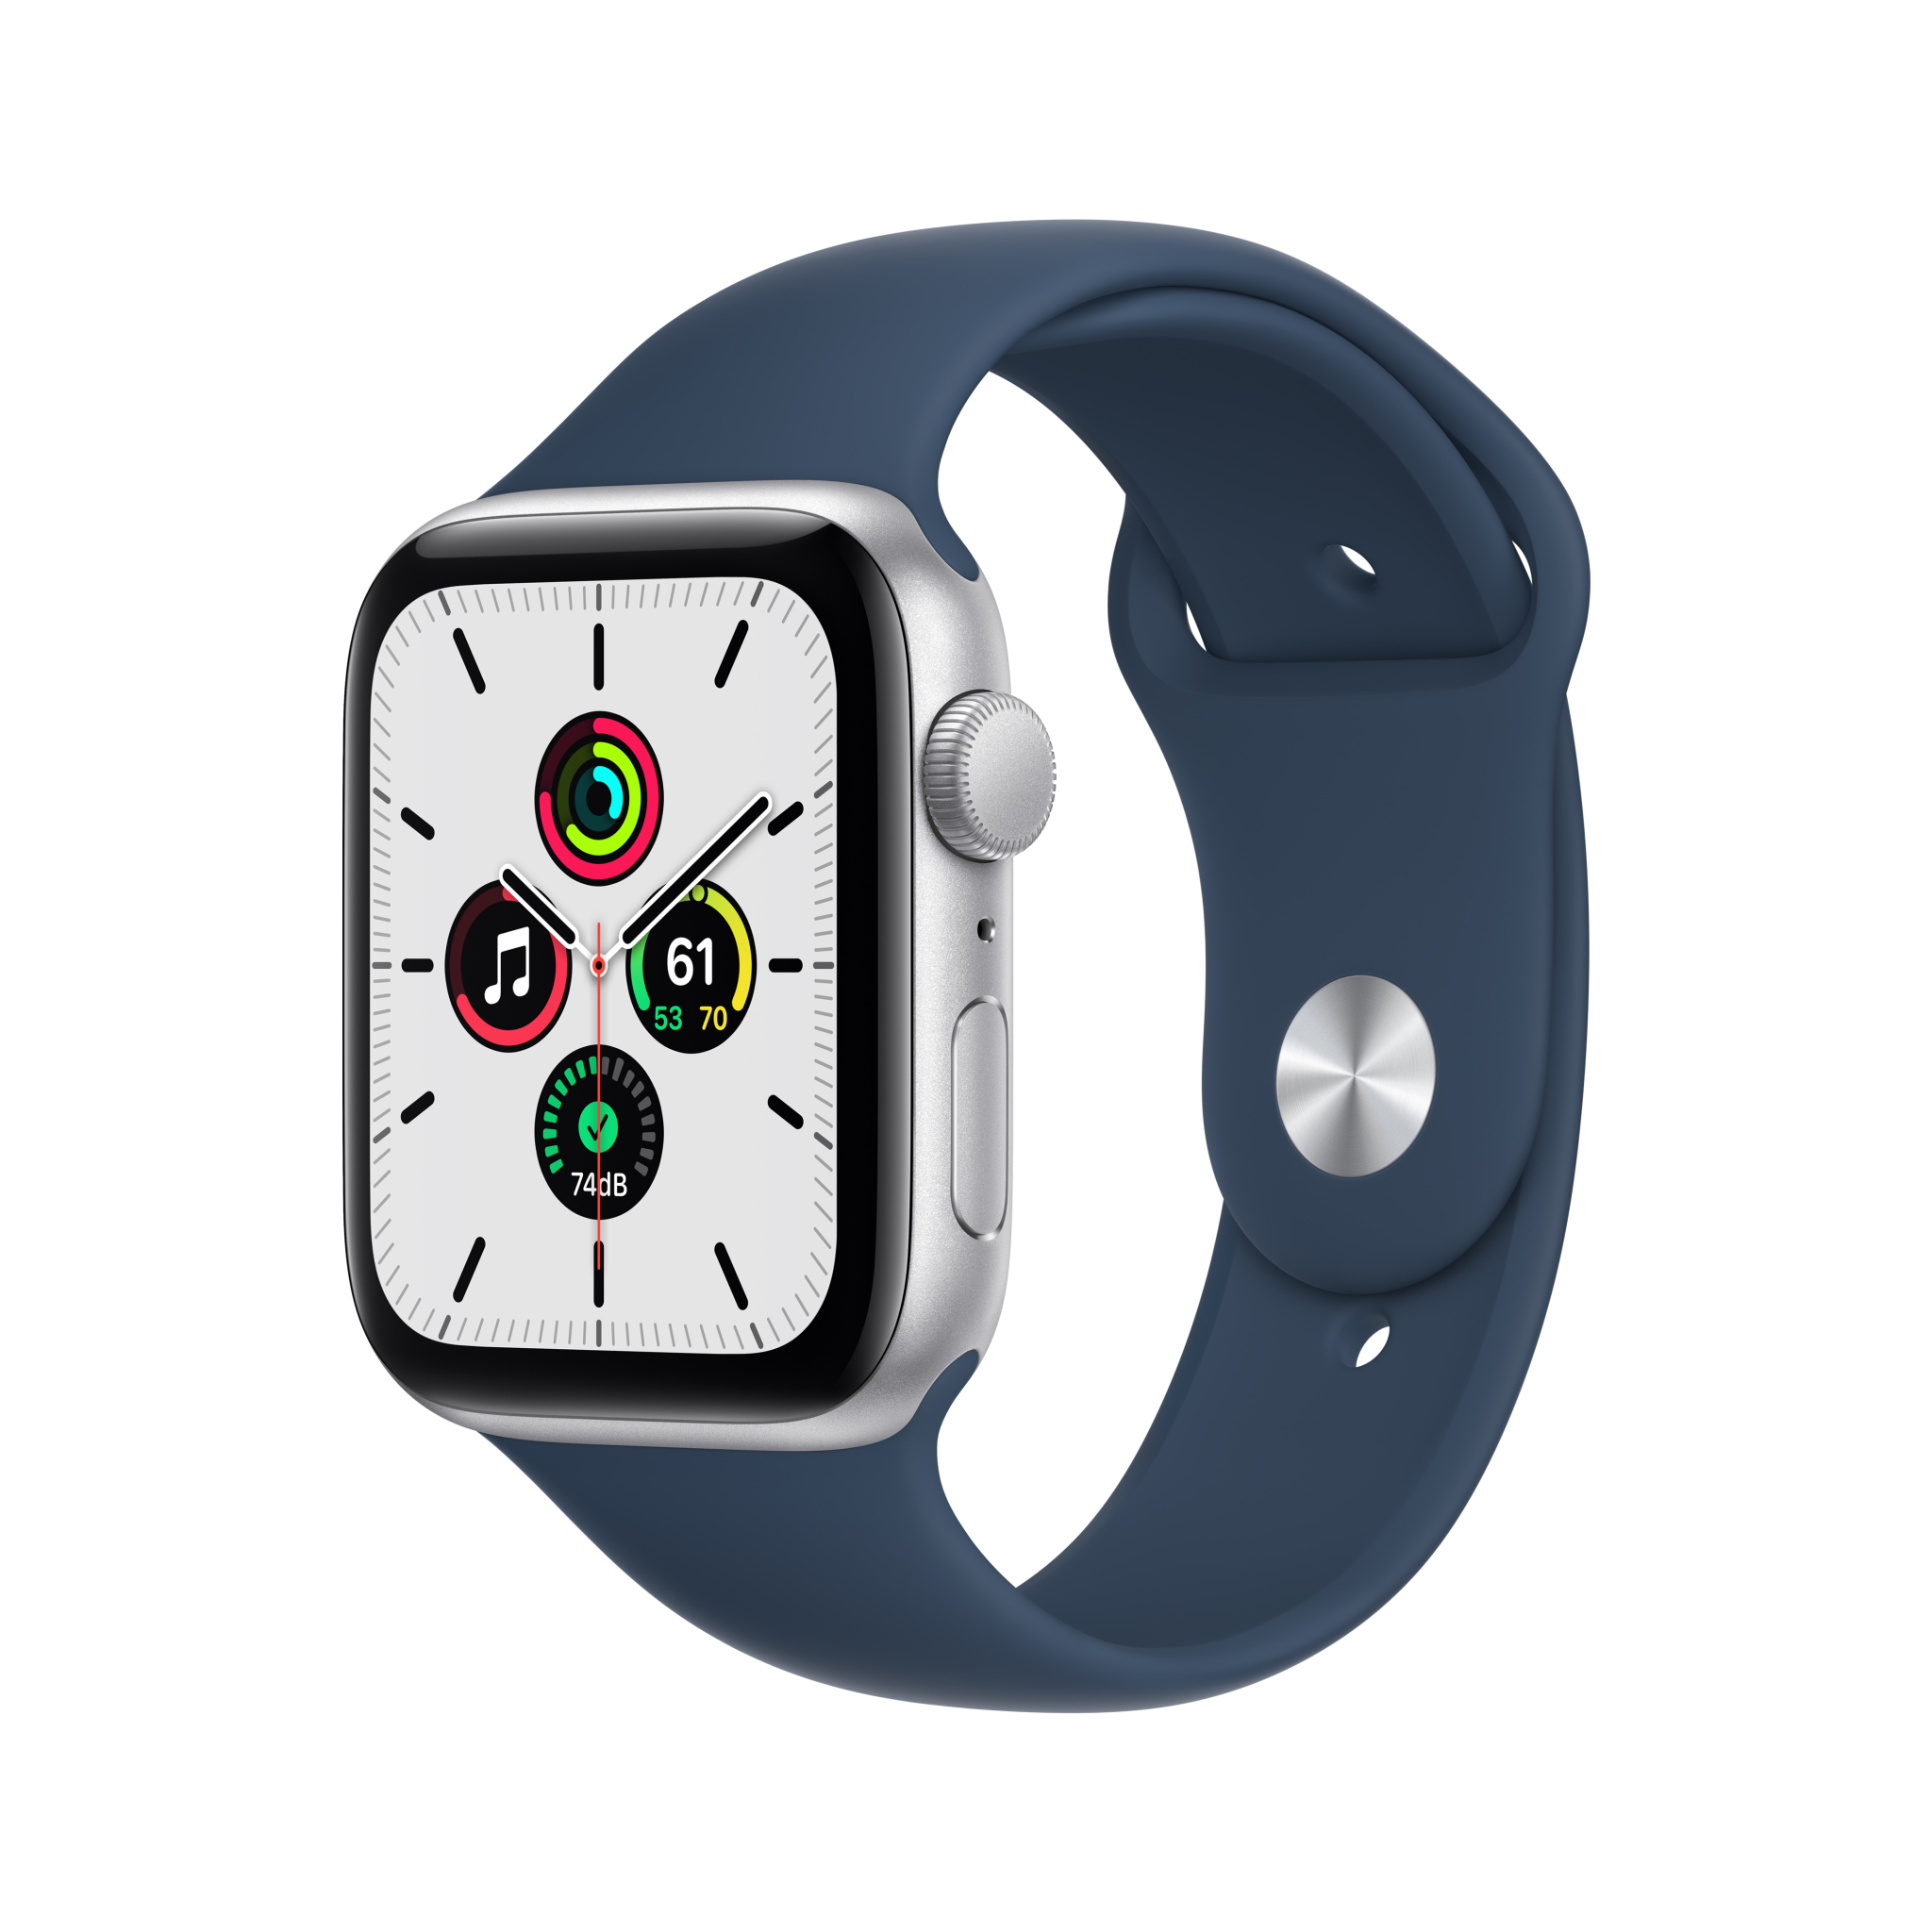 Apple Watch SE (1st Gen) GPS, 40mm Silver Aluminum Case with Abyss Blue Sport Band - Regular - image 1 of 9